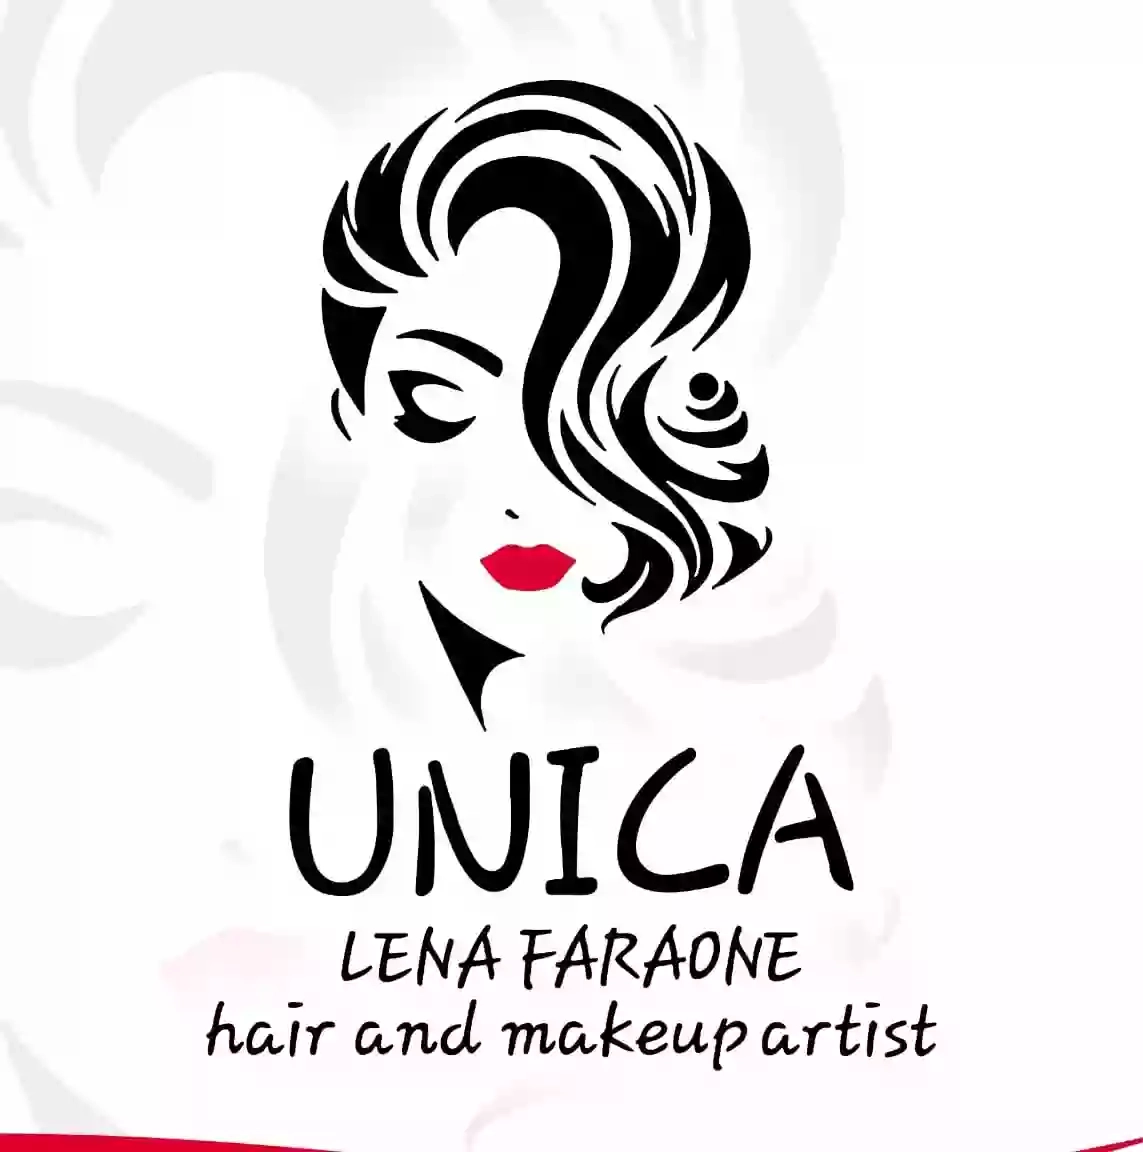 UNICA hair and makeup